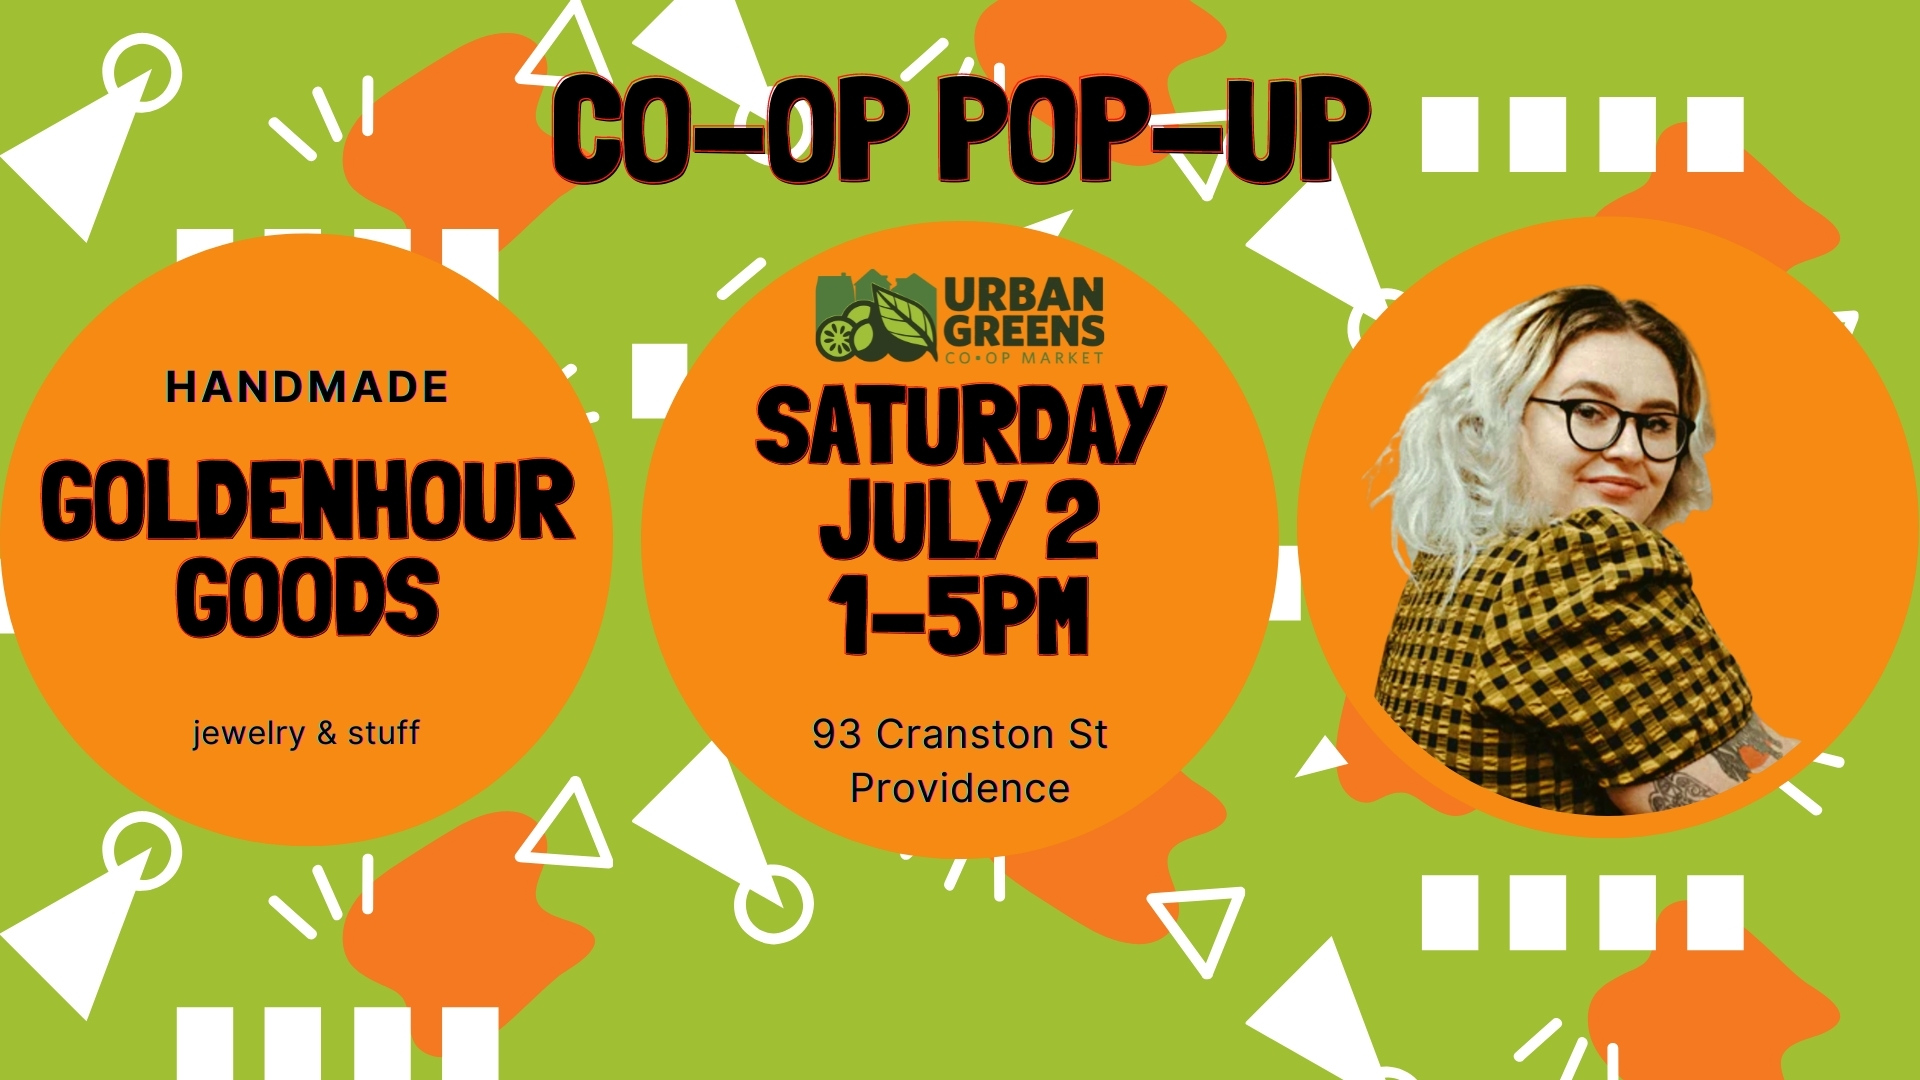 Pop-up shop at the co-op with Goldenhour Goods